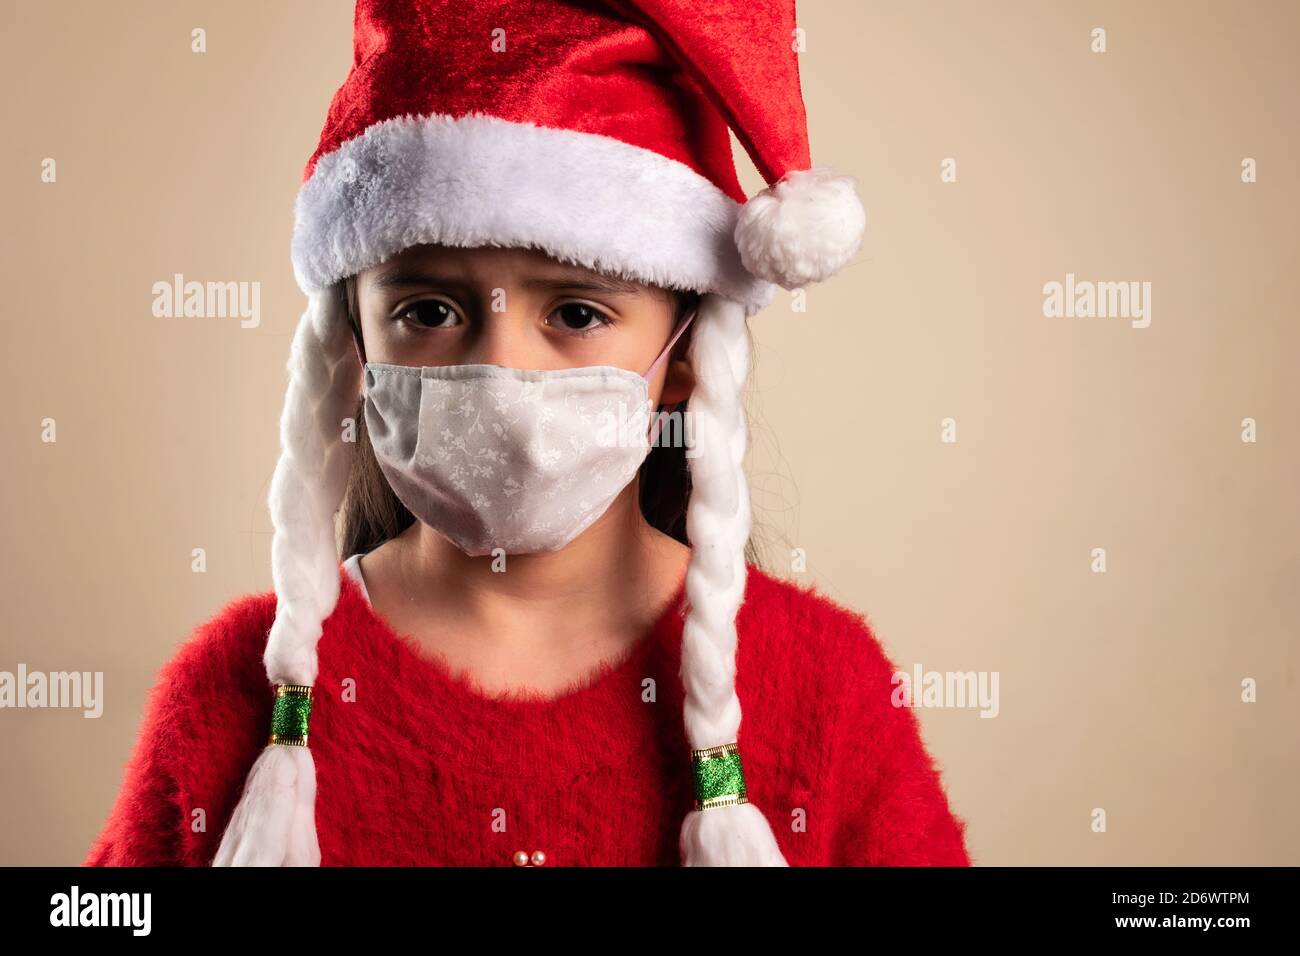 Sad girl wearing a red Santa Claus hat with braids and a face mask Stock Photo